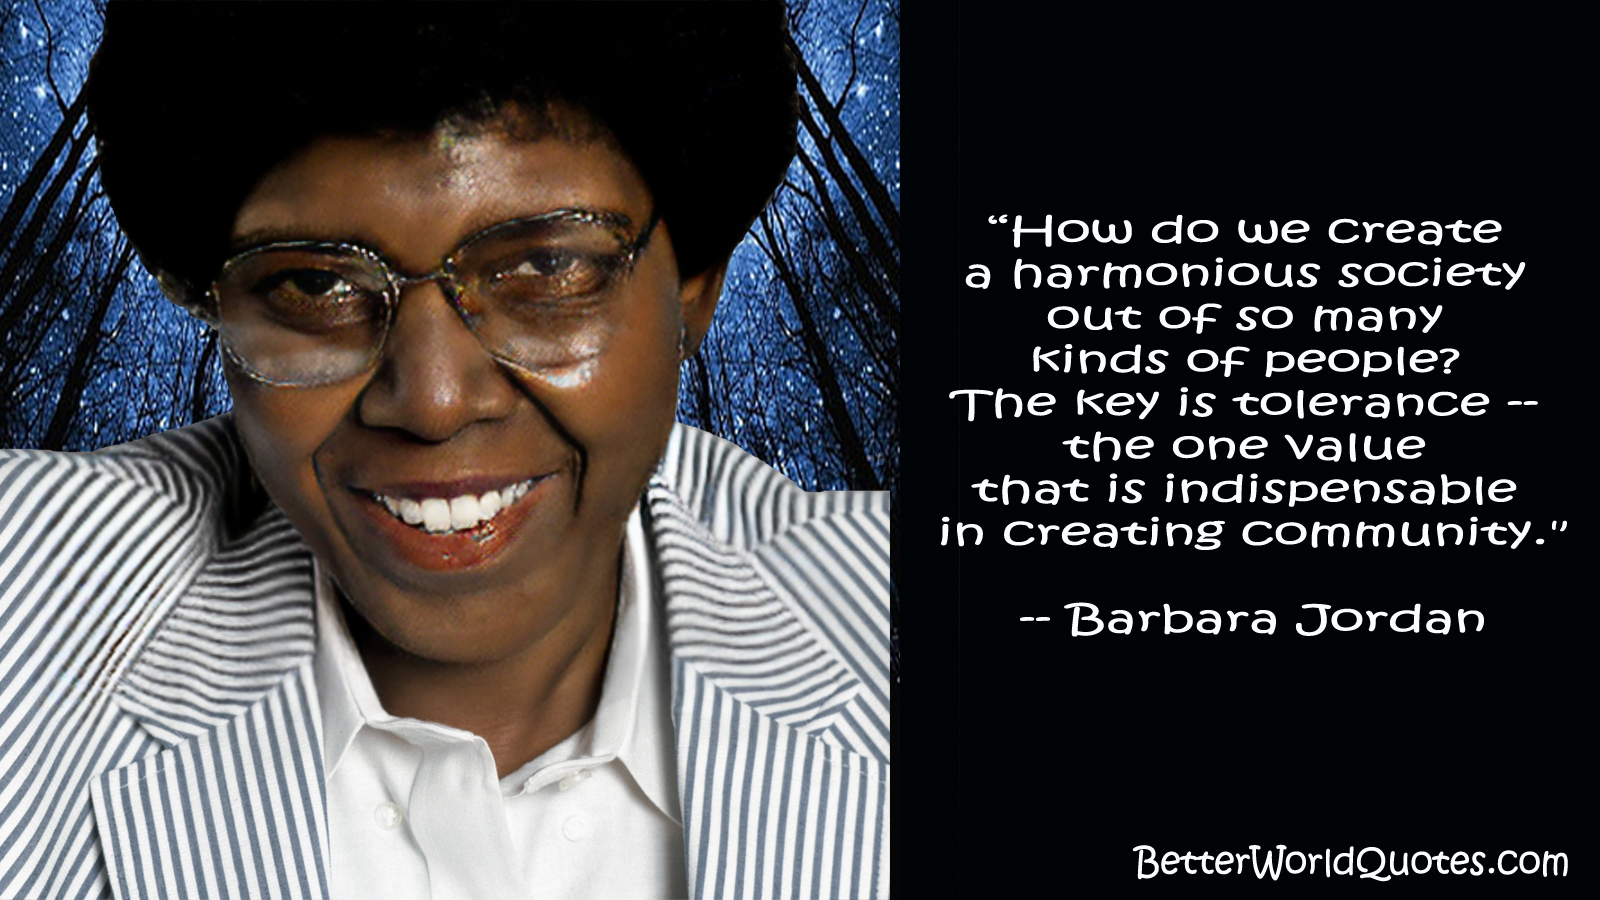 Barbara Jordan: How do we create a harmonious society out of so many kinds of people? The key is tolerance -- the one value that is indispensable in creating community.